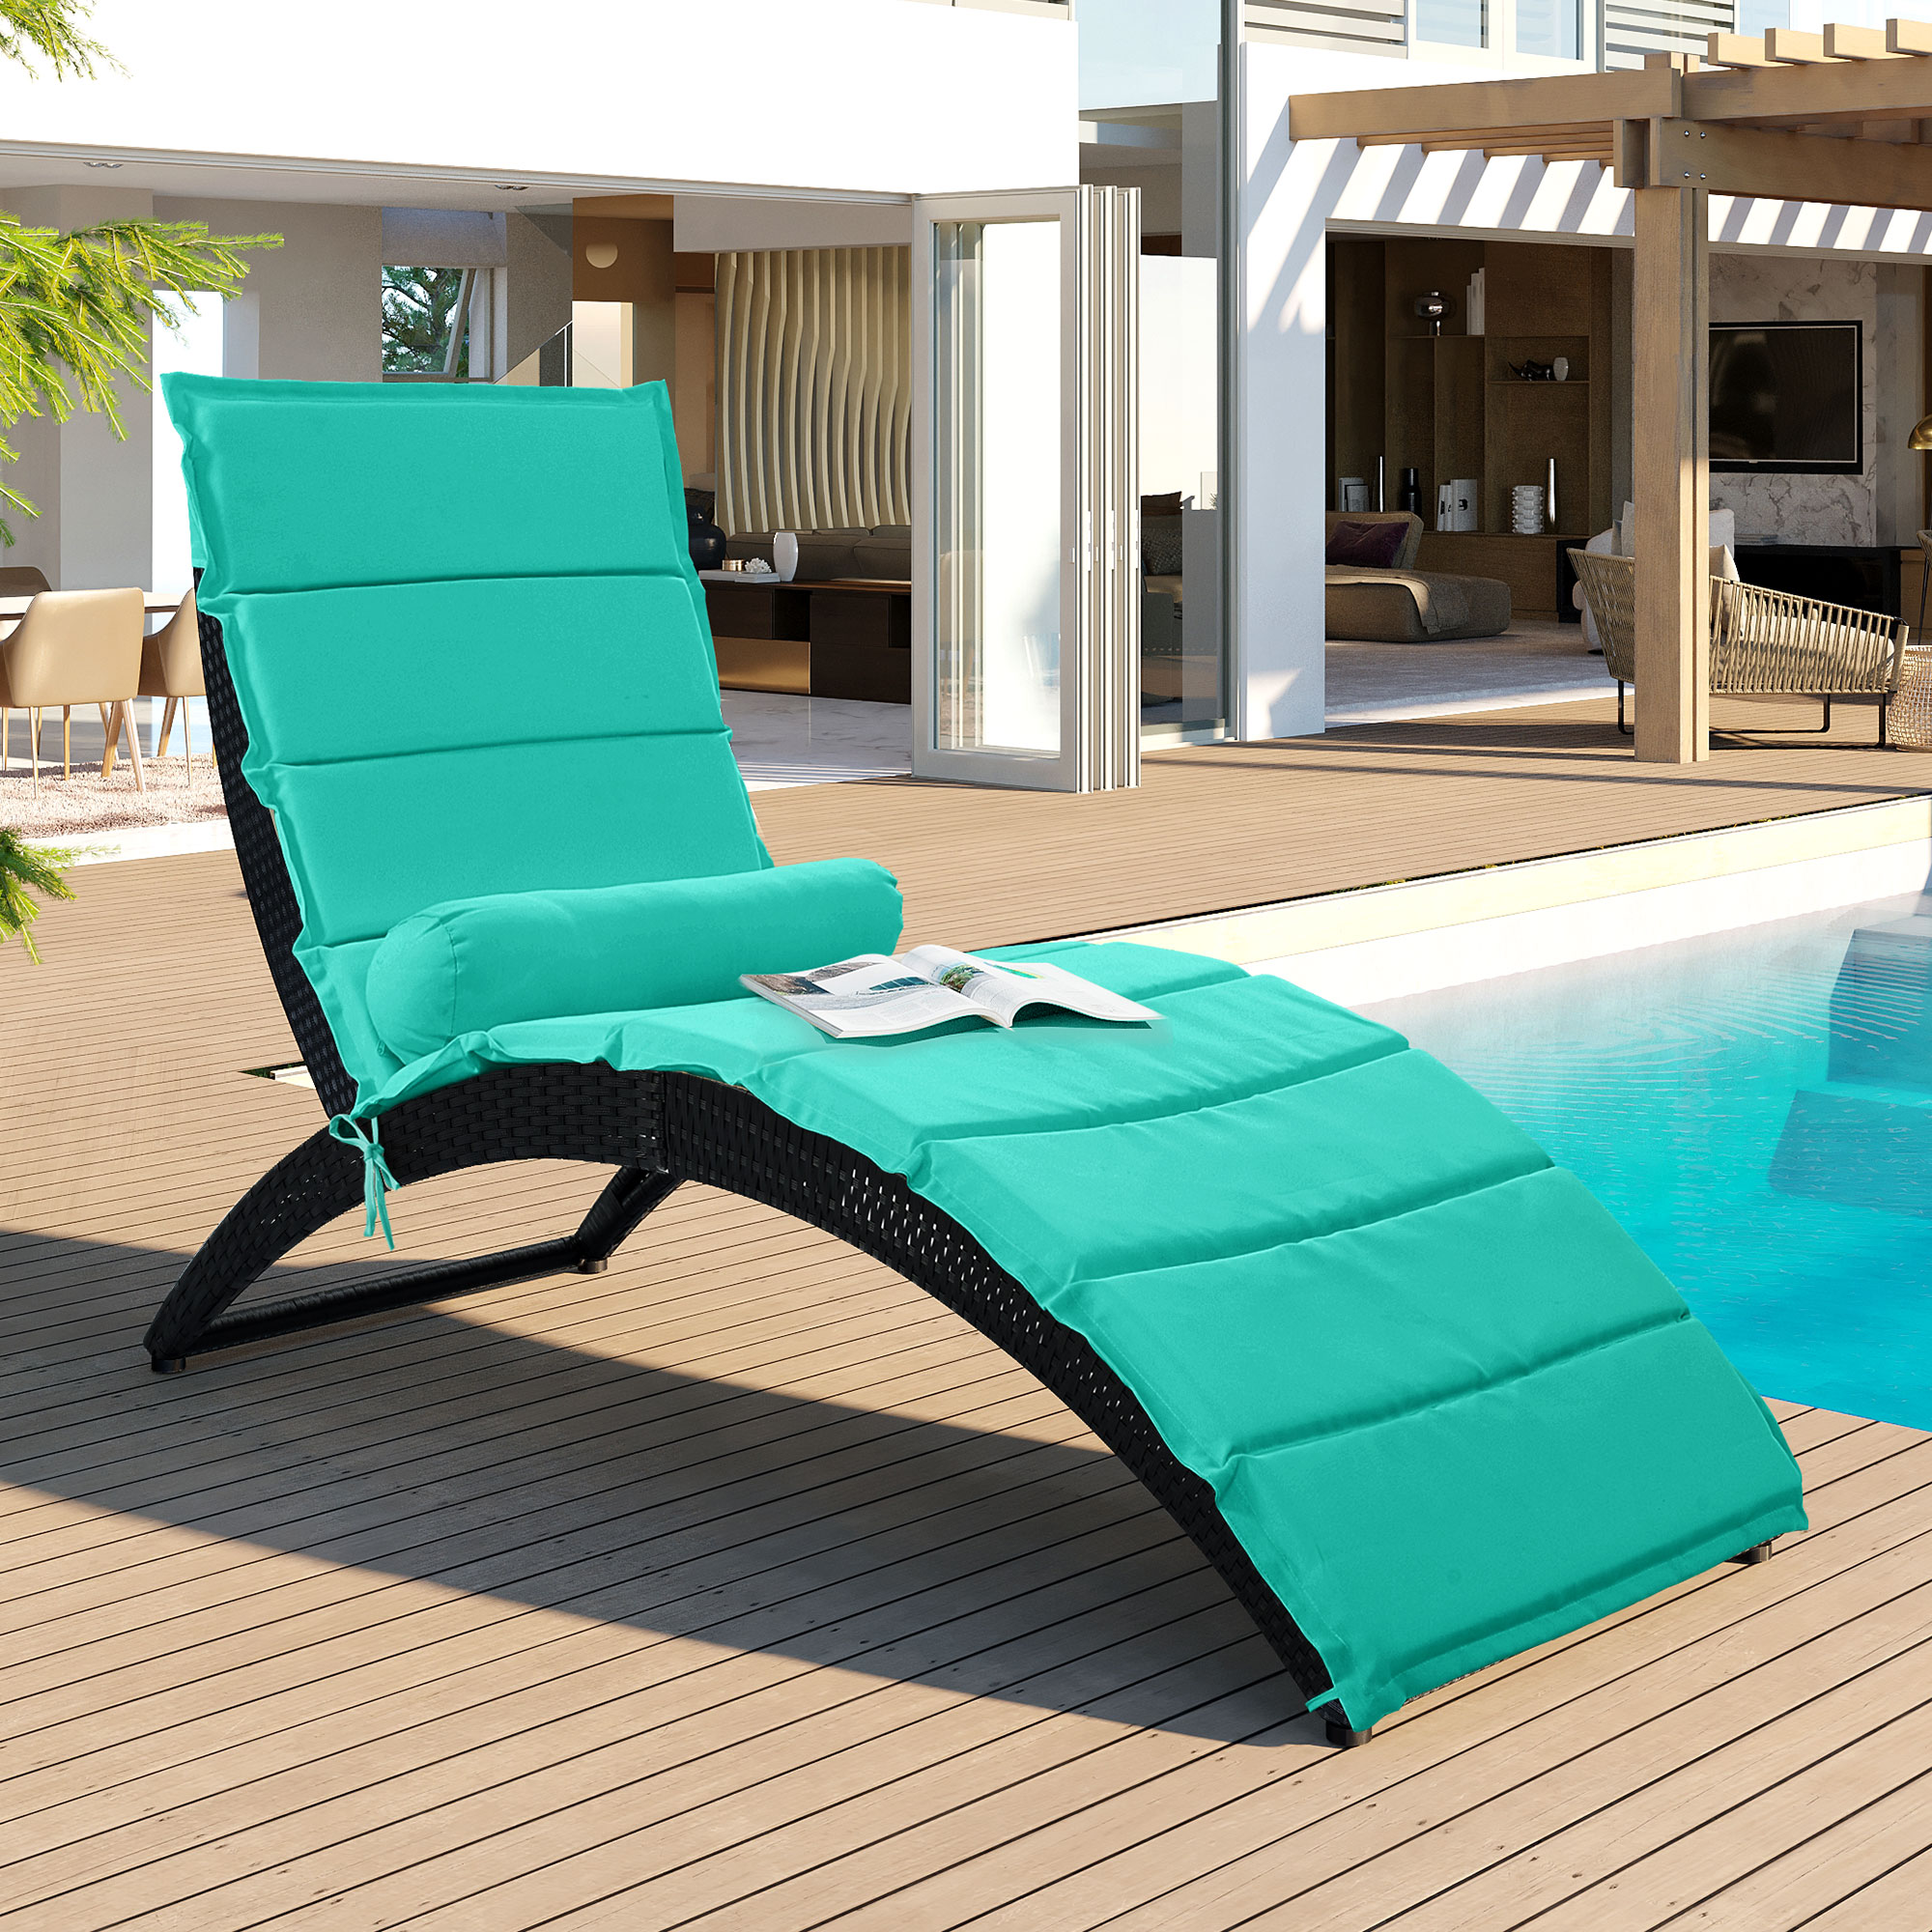 Chaise Lounge Chair for Outside, SYNGAR PE Wicker Foldable Reclining Chair, Patio Sun Lounger with Removable Cushions, Rattan Chaise Chair for Poolside, Garden, Backyard, Greenish-blue, D8584 - image 1 of 11